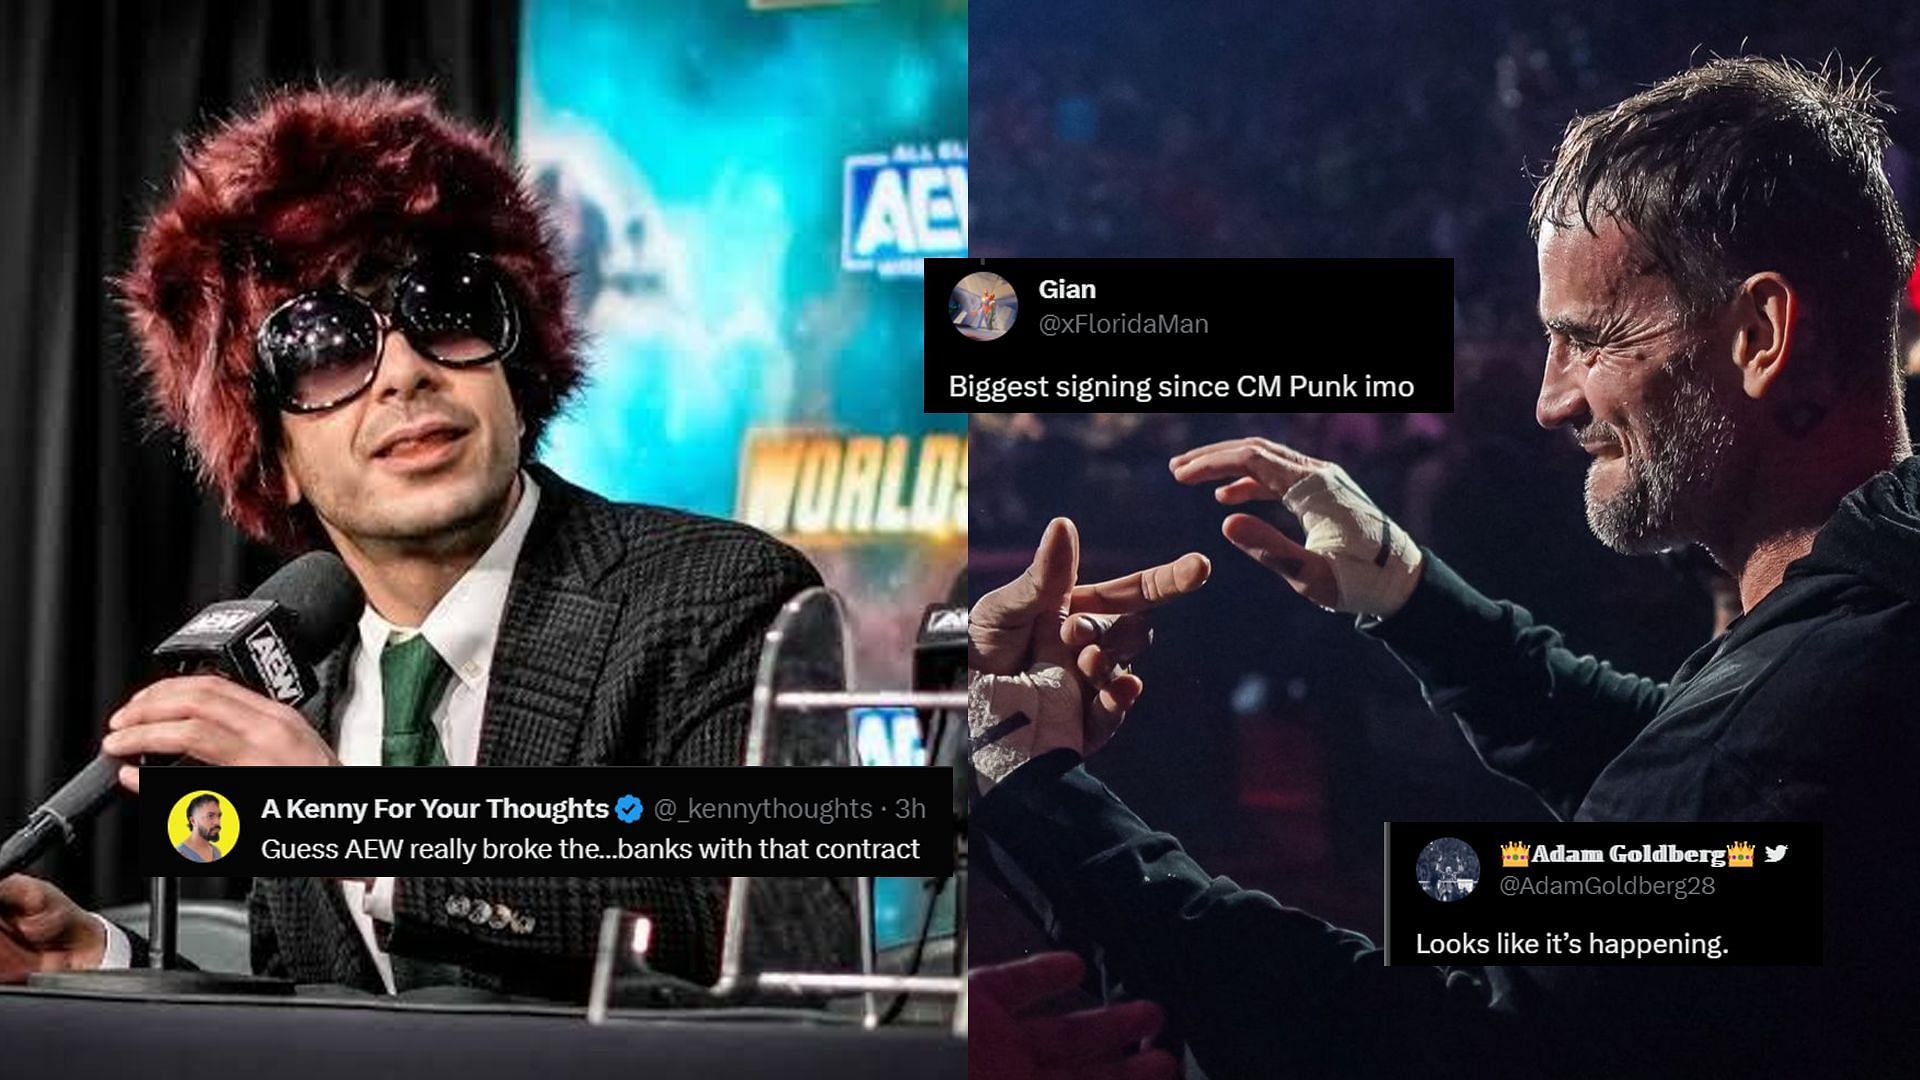 After CM Punk, Tony Khan is looking to make another one of his big signees 